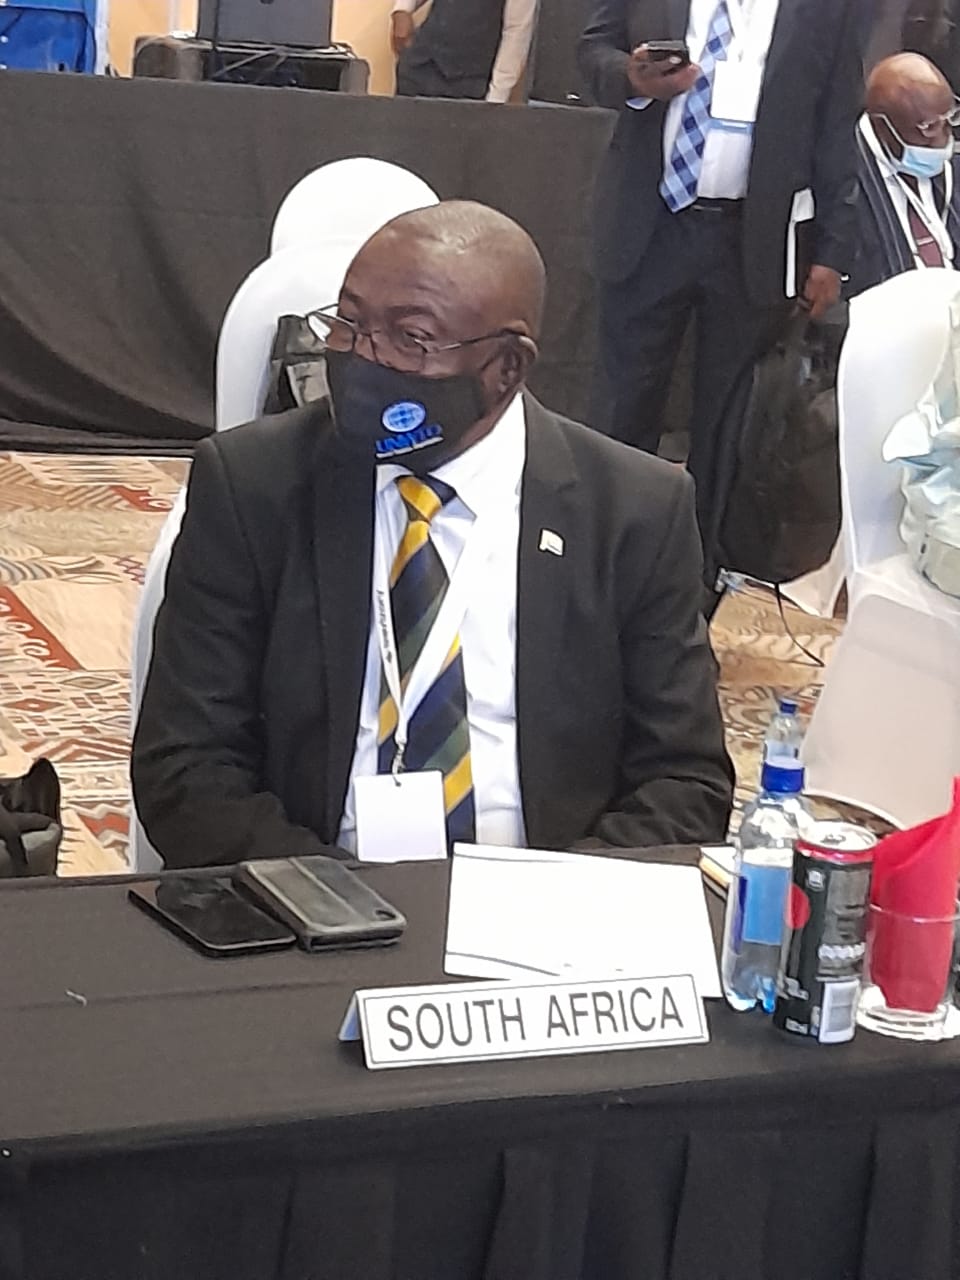 SA Deputy Minister of Tourism Fish Mahlalela attends UN World Tourism meeting for Africa in Namibia